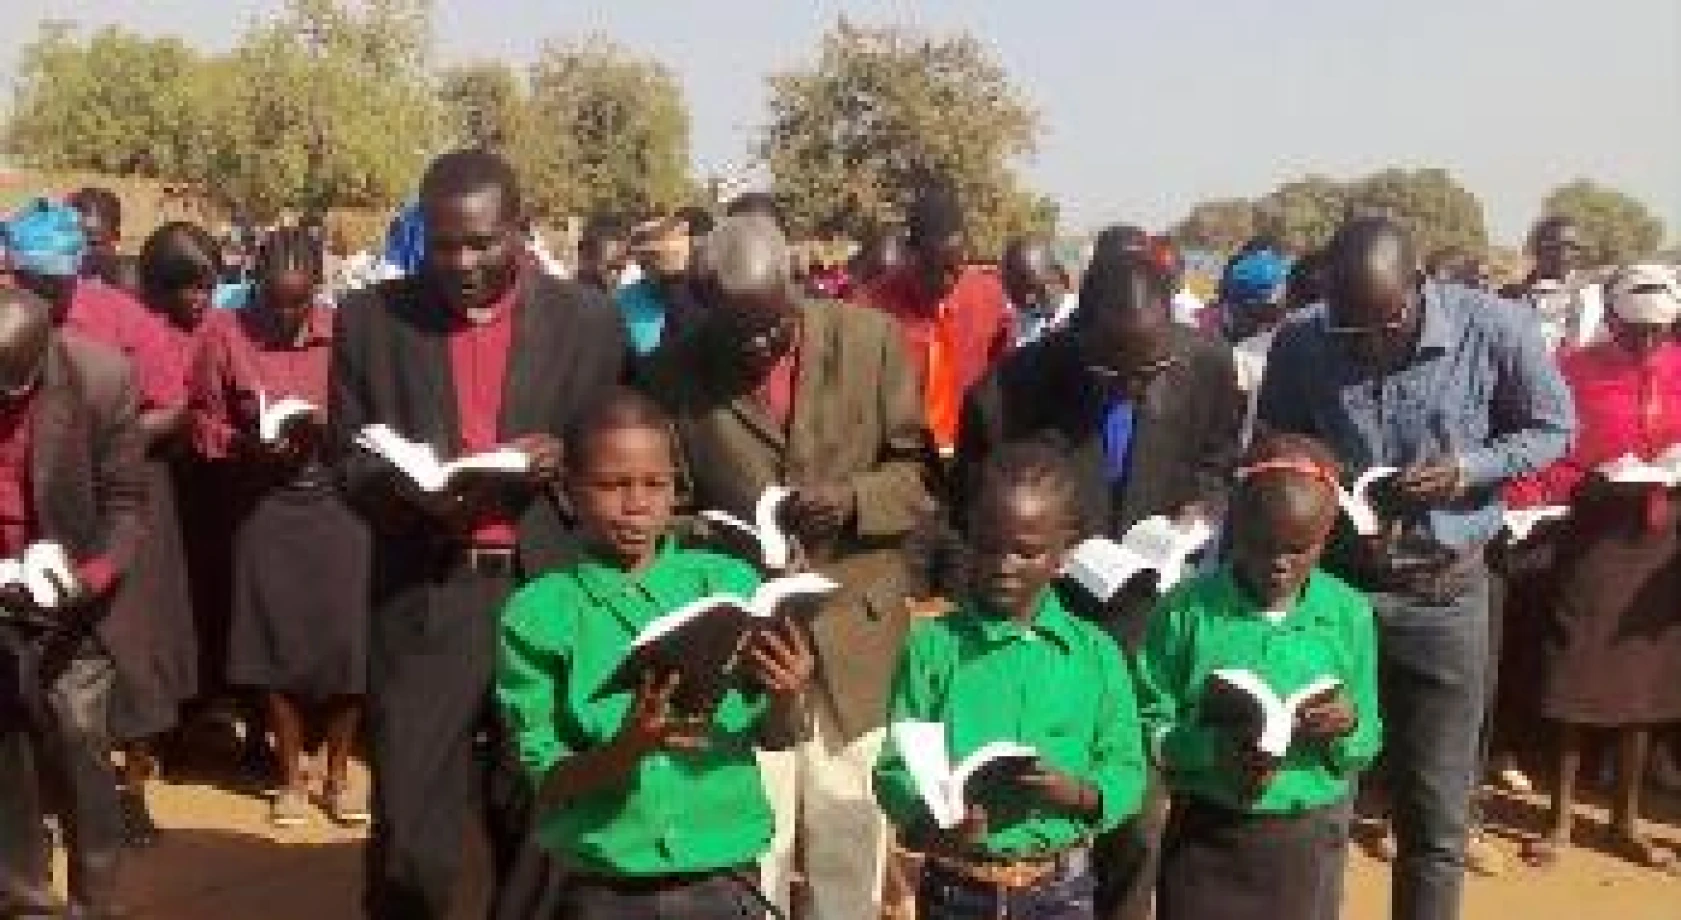 Bible launch in South Sudan attracts 10,000 people